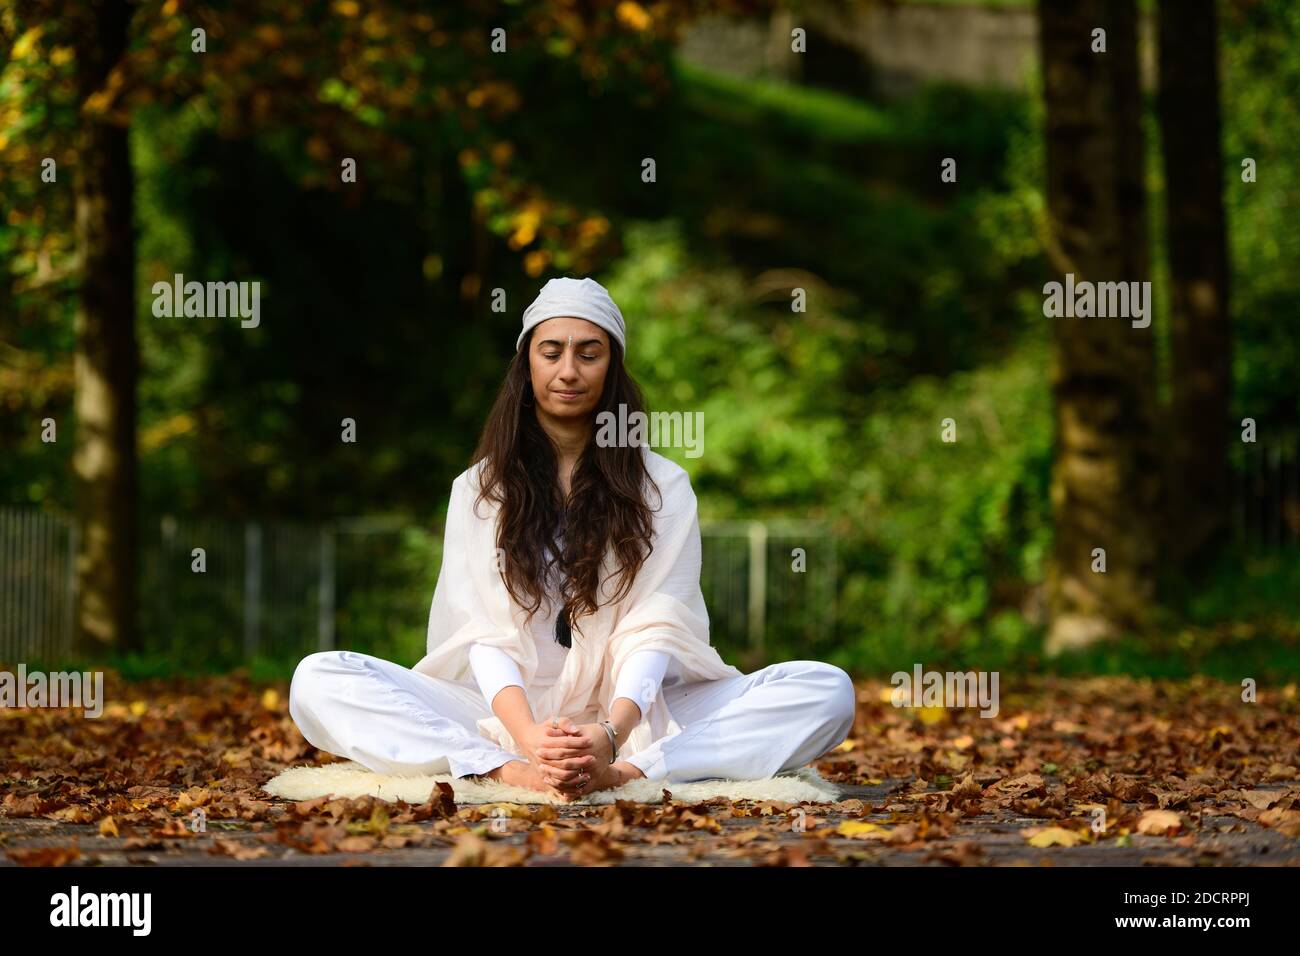 Woman in white in autumn park while doing yoga Stock Photo